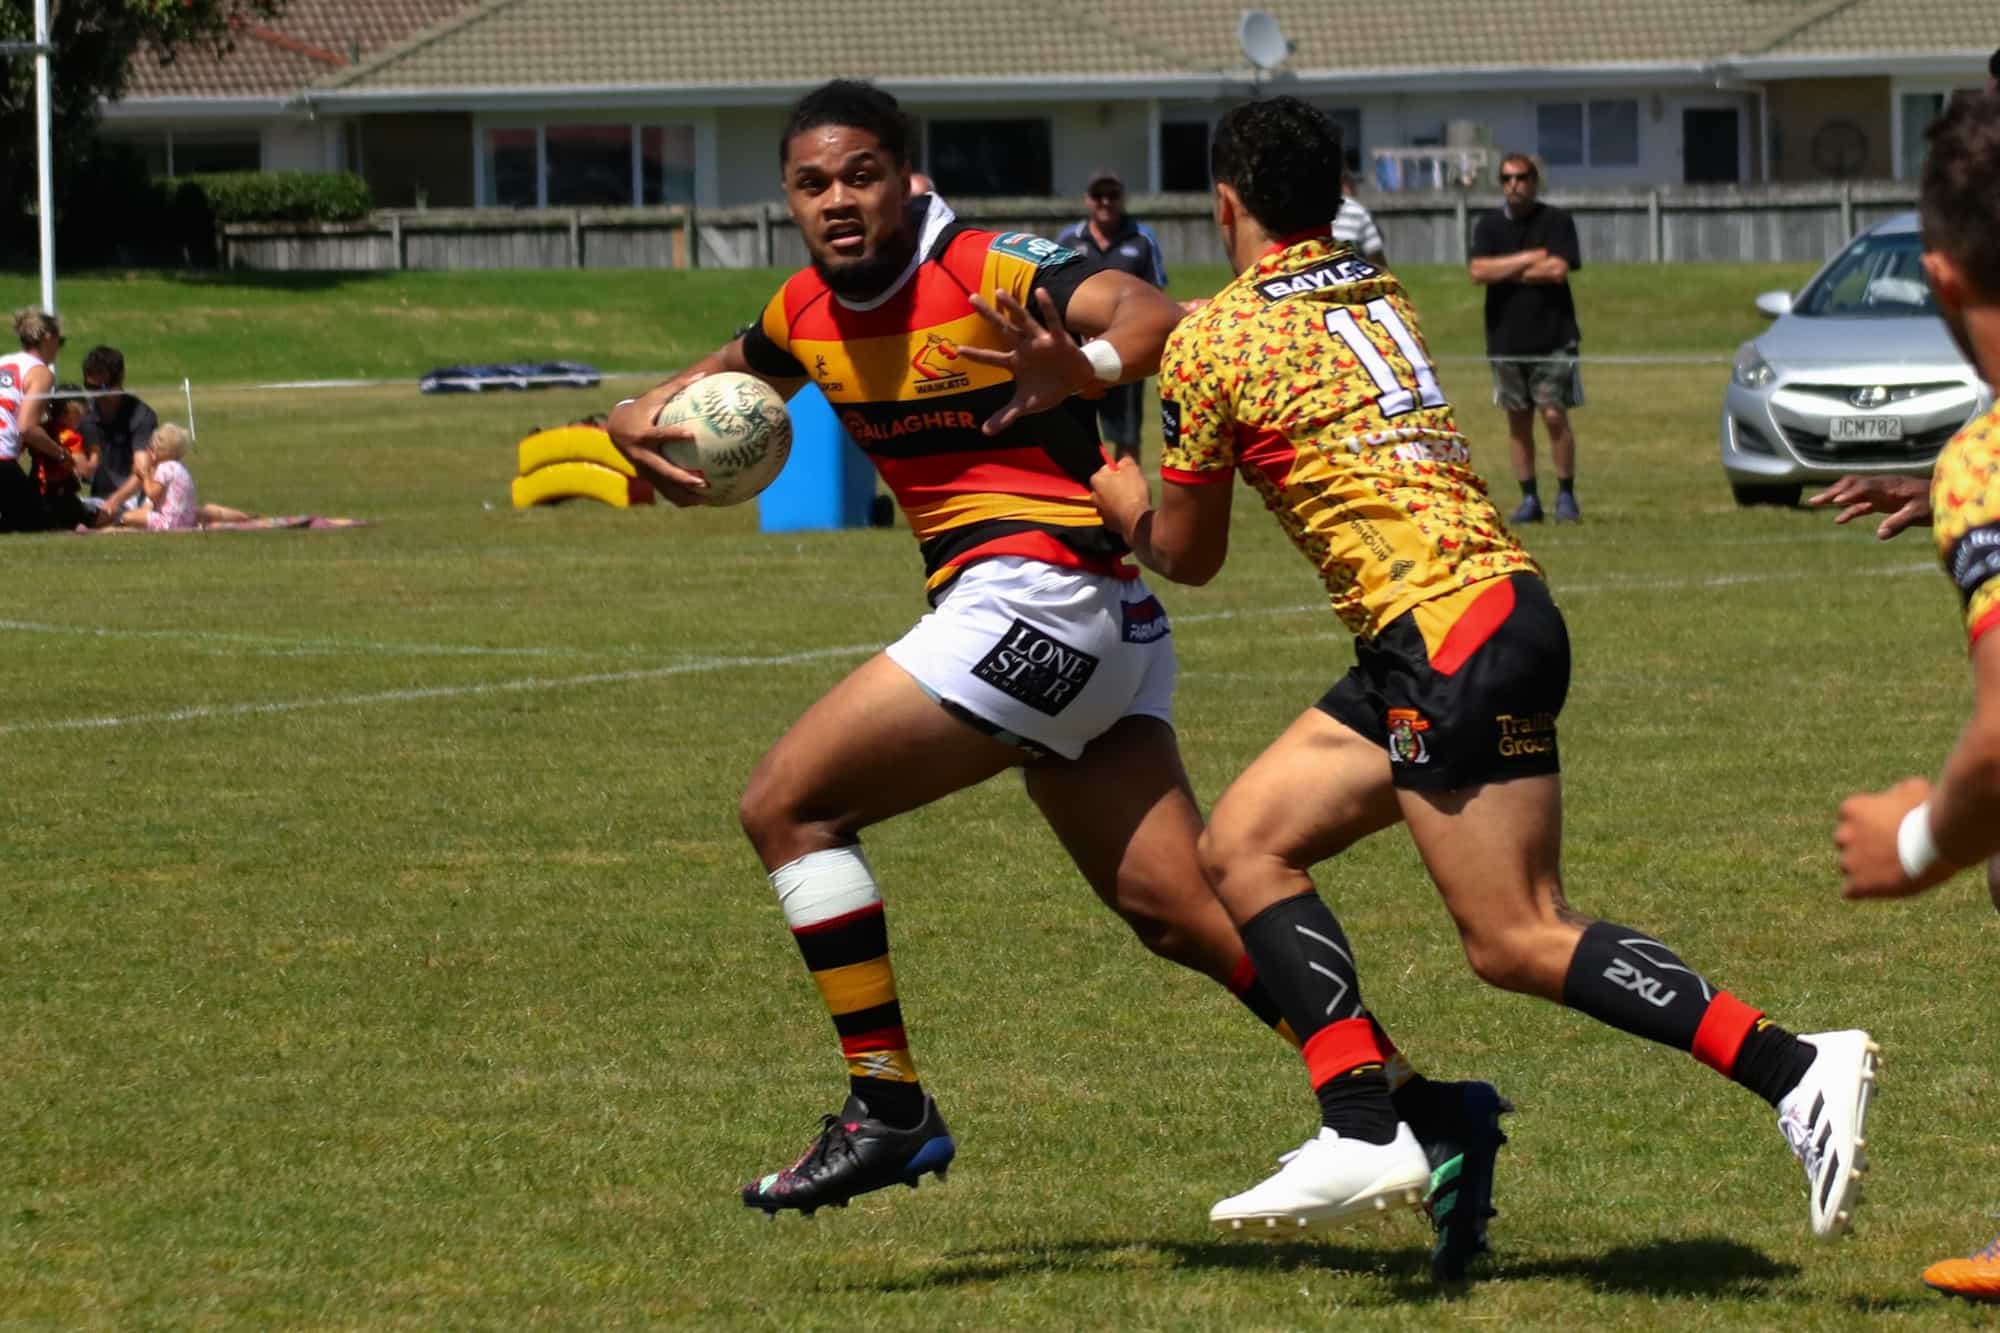 Waikato Men’s and Women’s Sevens teams announced for Northern Regional Sevens